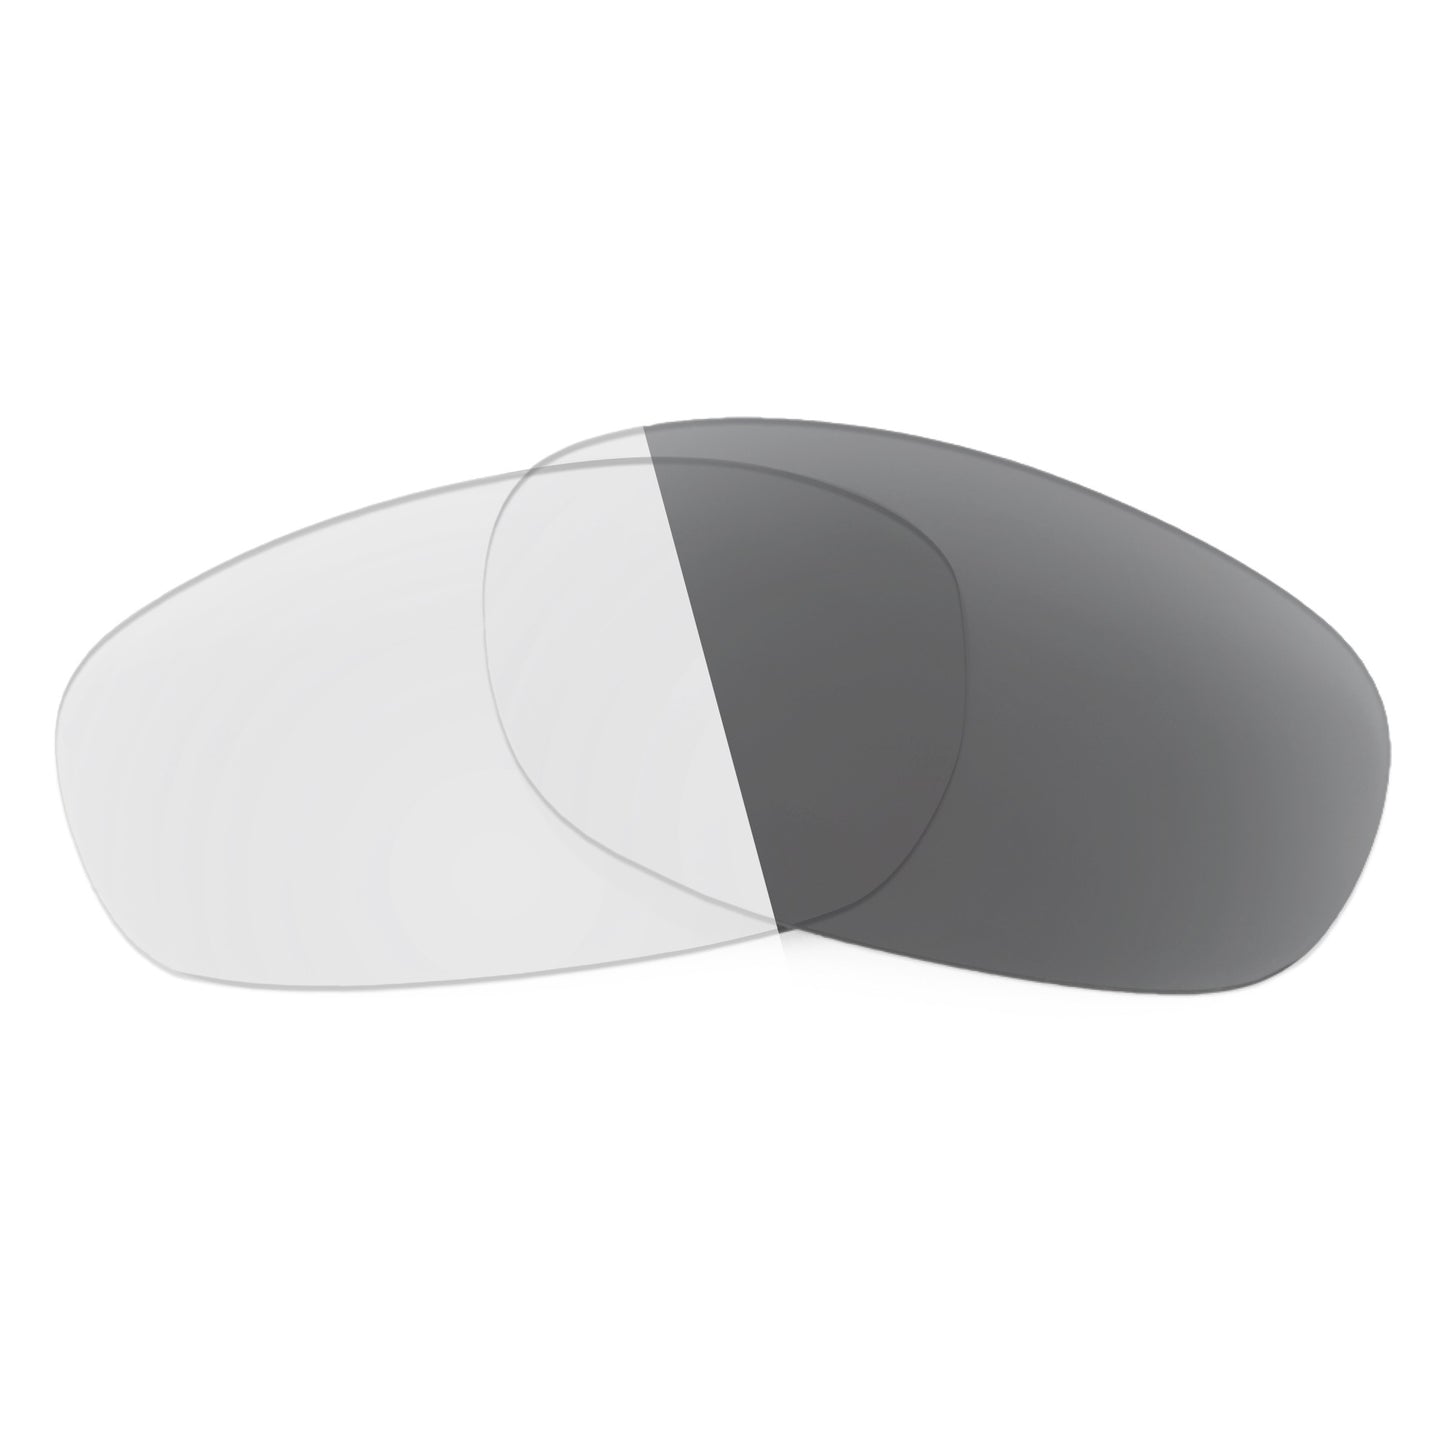 Revant replacement lenses for Ray-Ban RB4102 63mm Non-Polarized Adapt Gray Photochromic